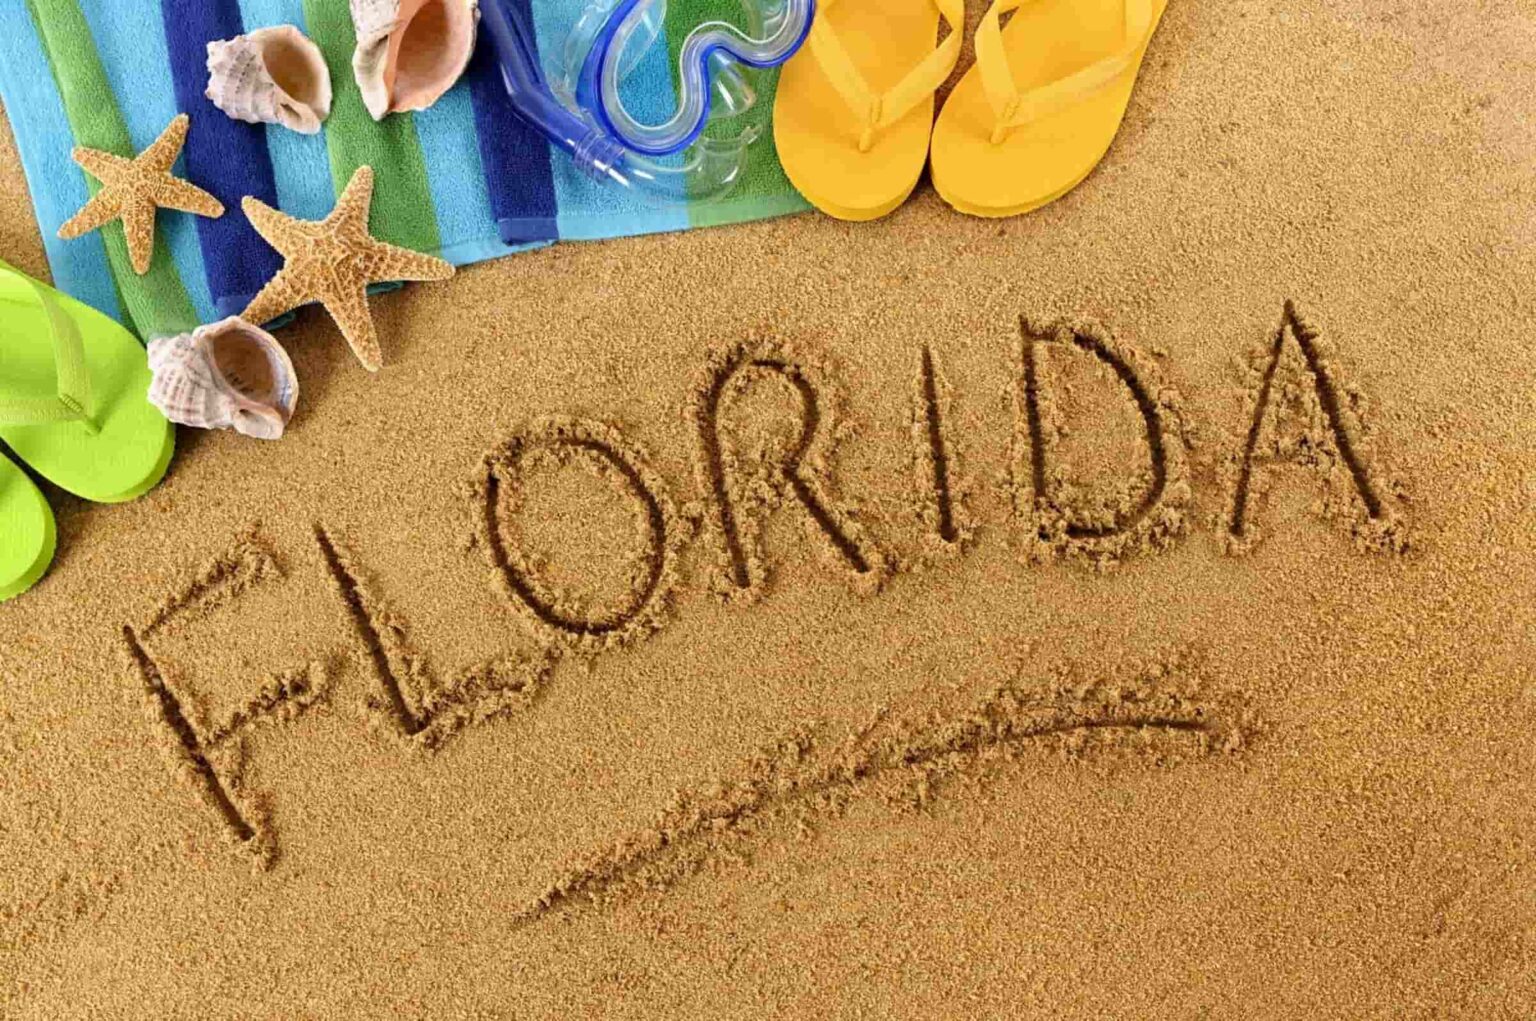 Florida is one of the top vacation spots in the world, and with the pandemic dying down, travel plans are back on the table. See these great destinations!